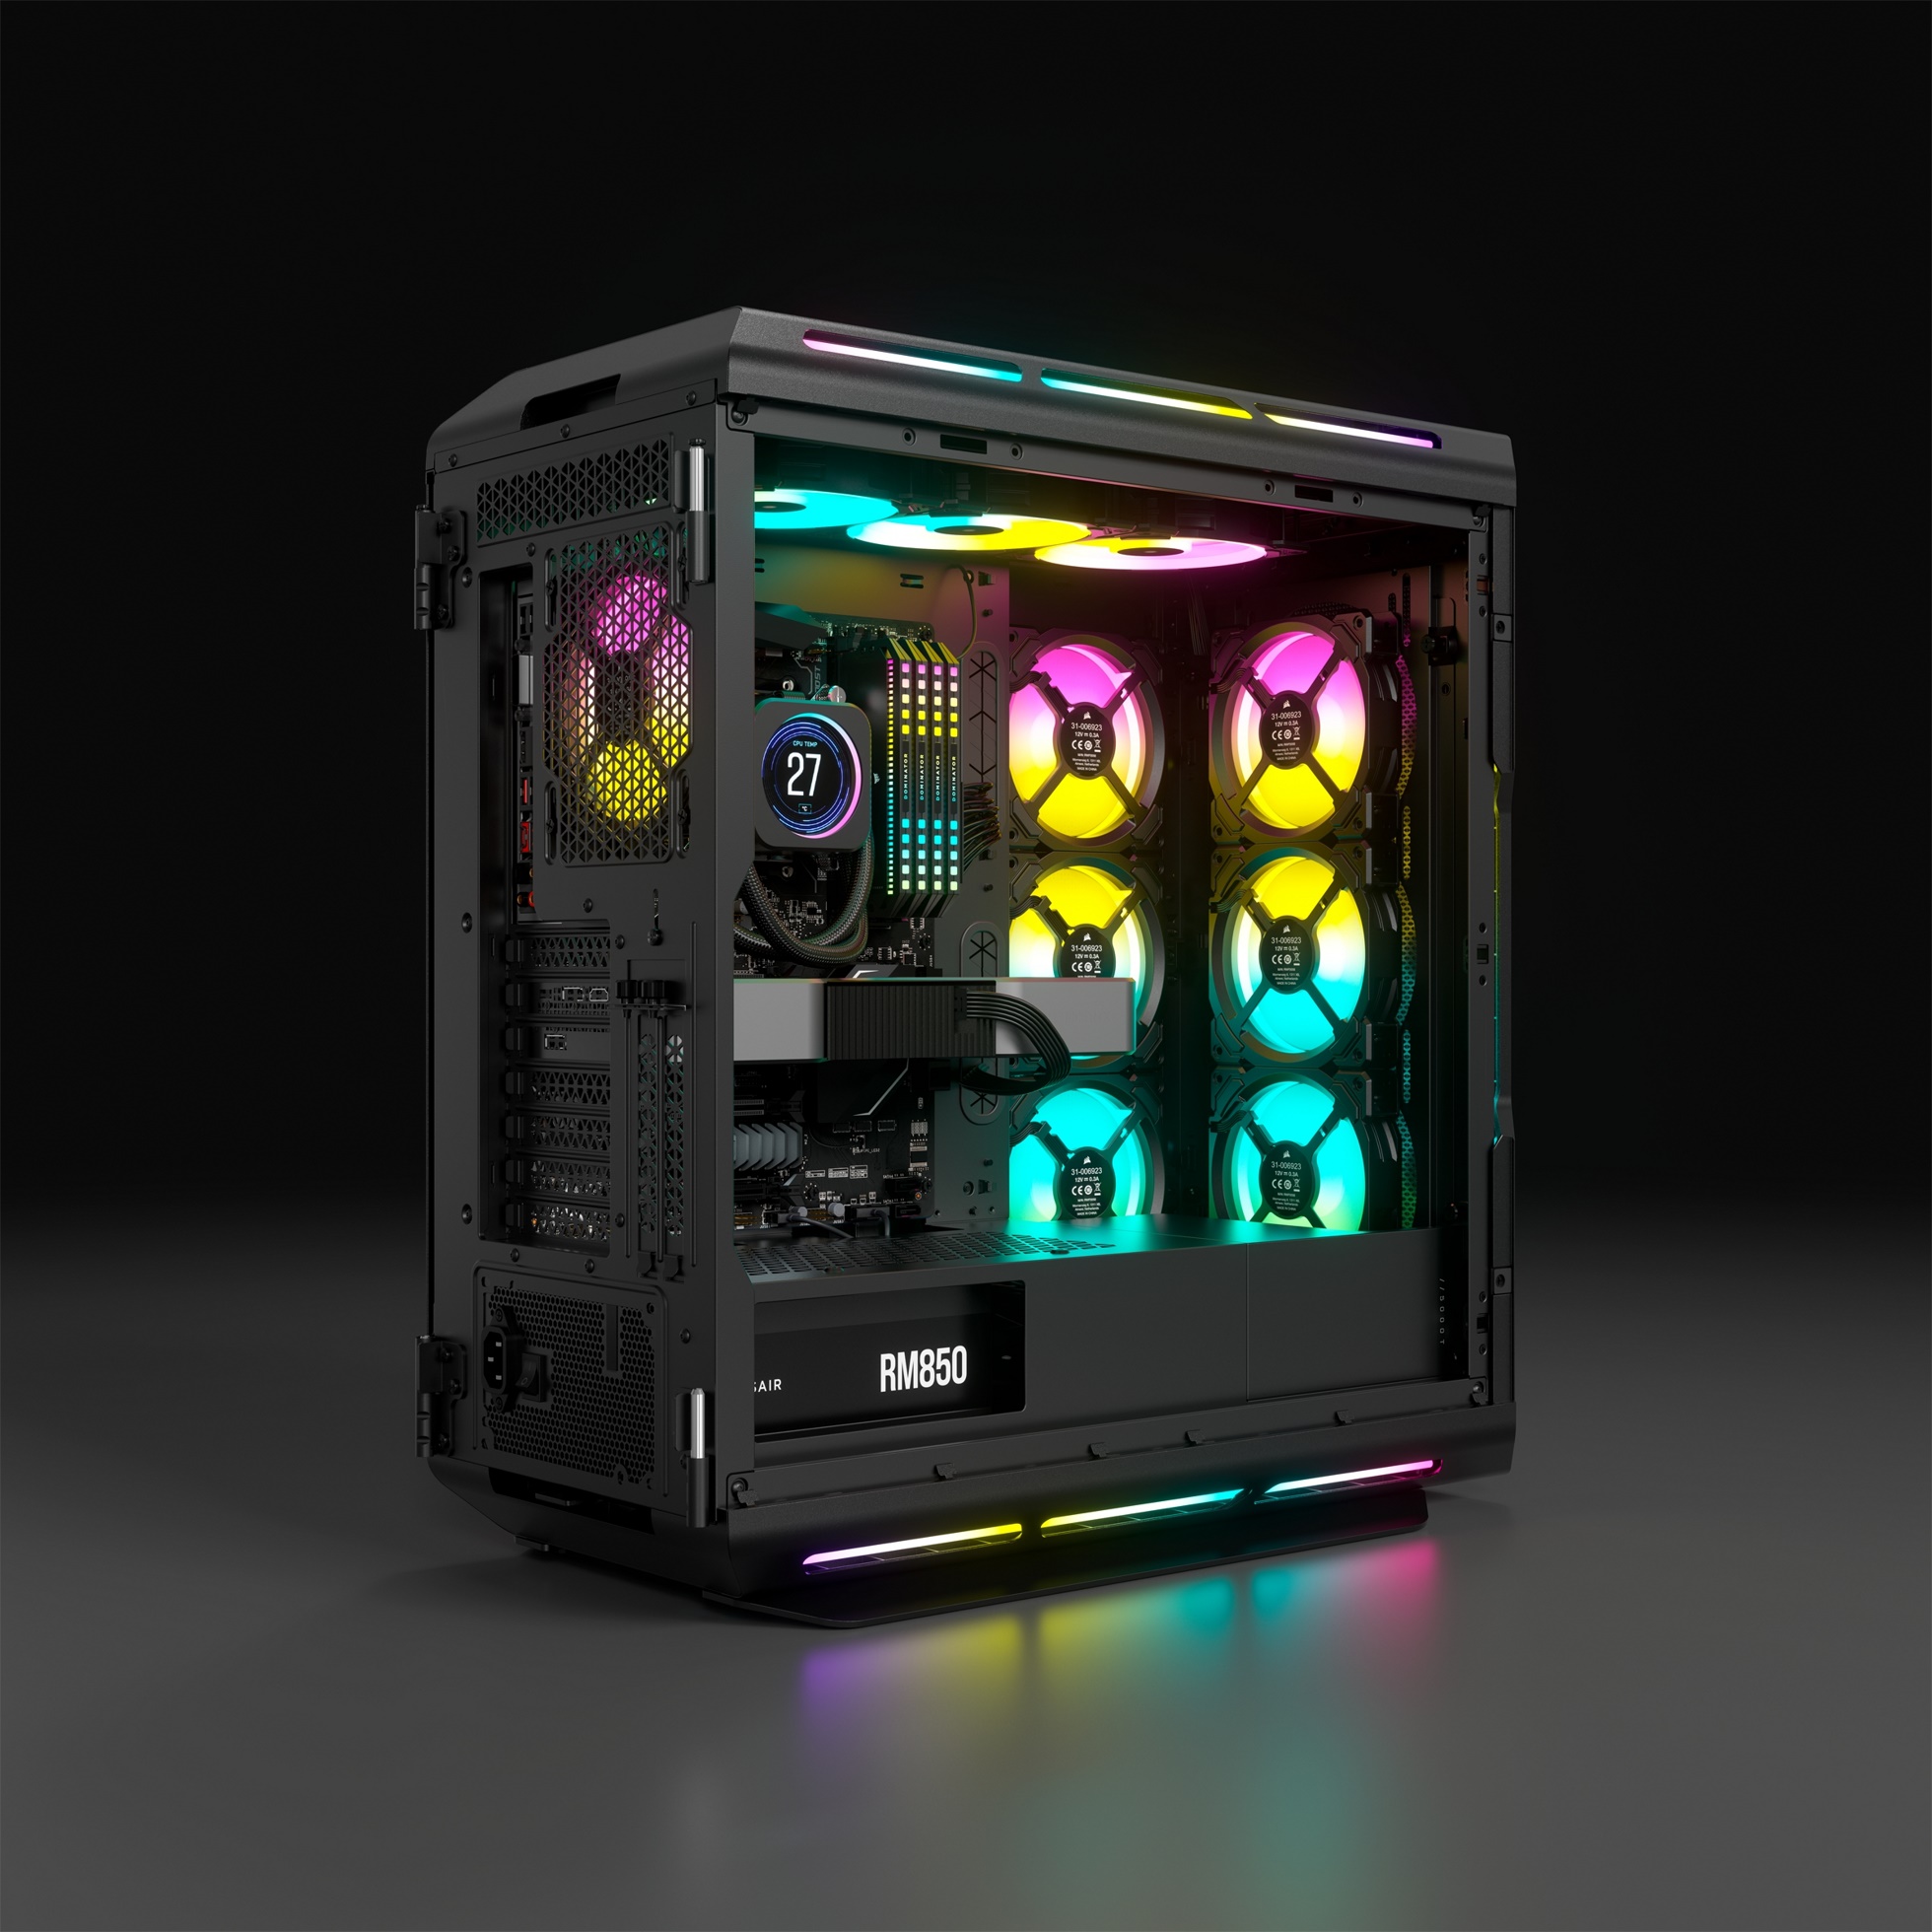 mid-tower with high-end absolute RGB | RGB - case CORSAIR review in 5000T overkill igor´sLAB iCUE